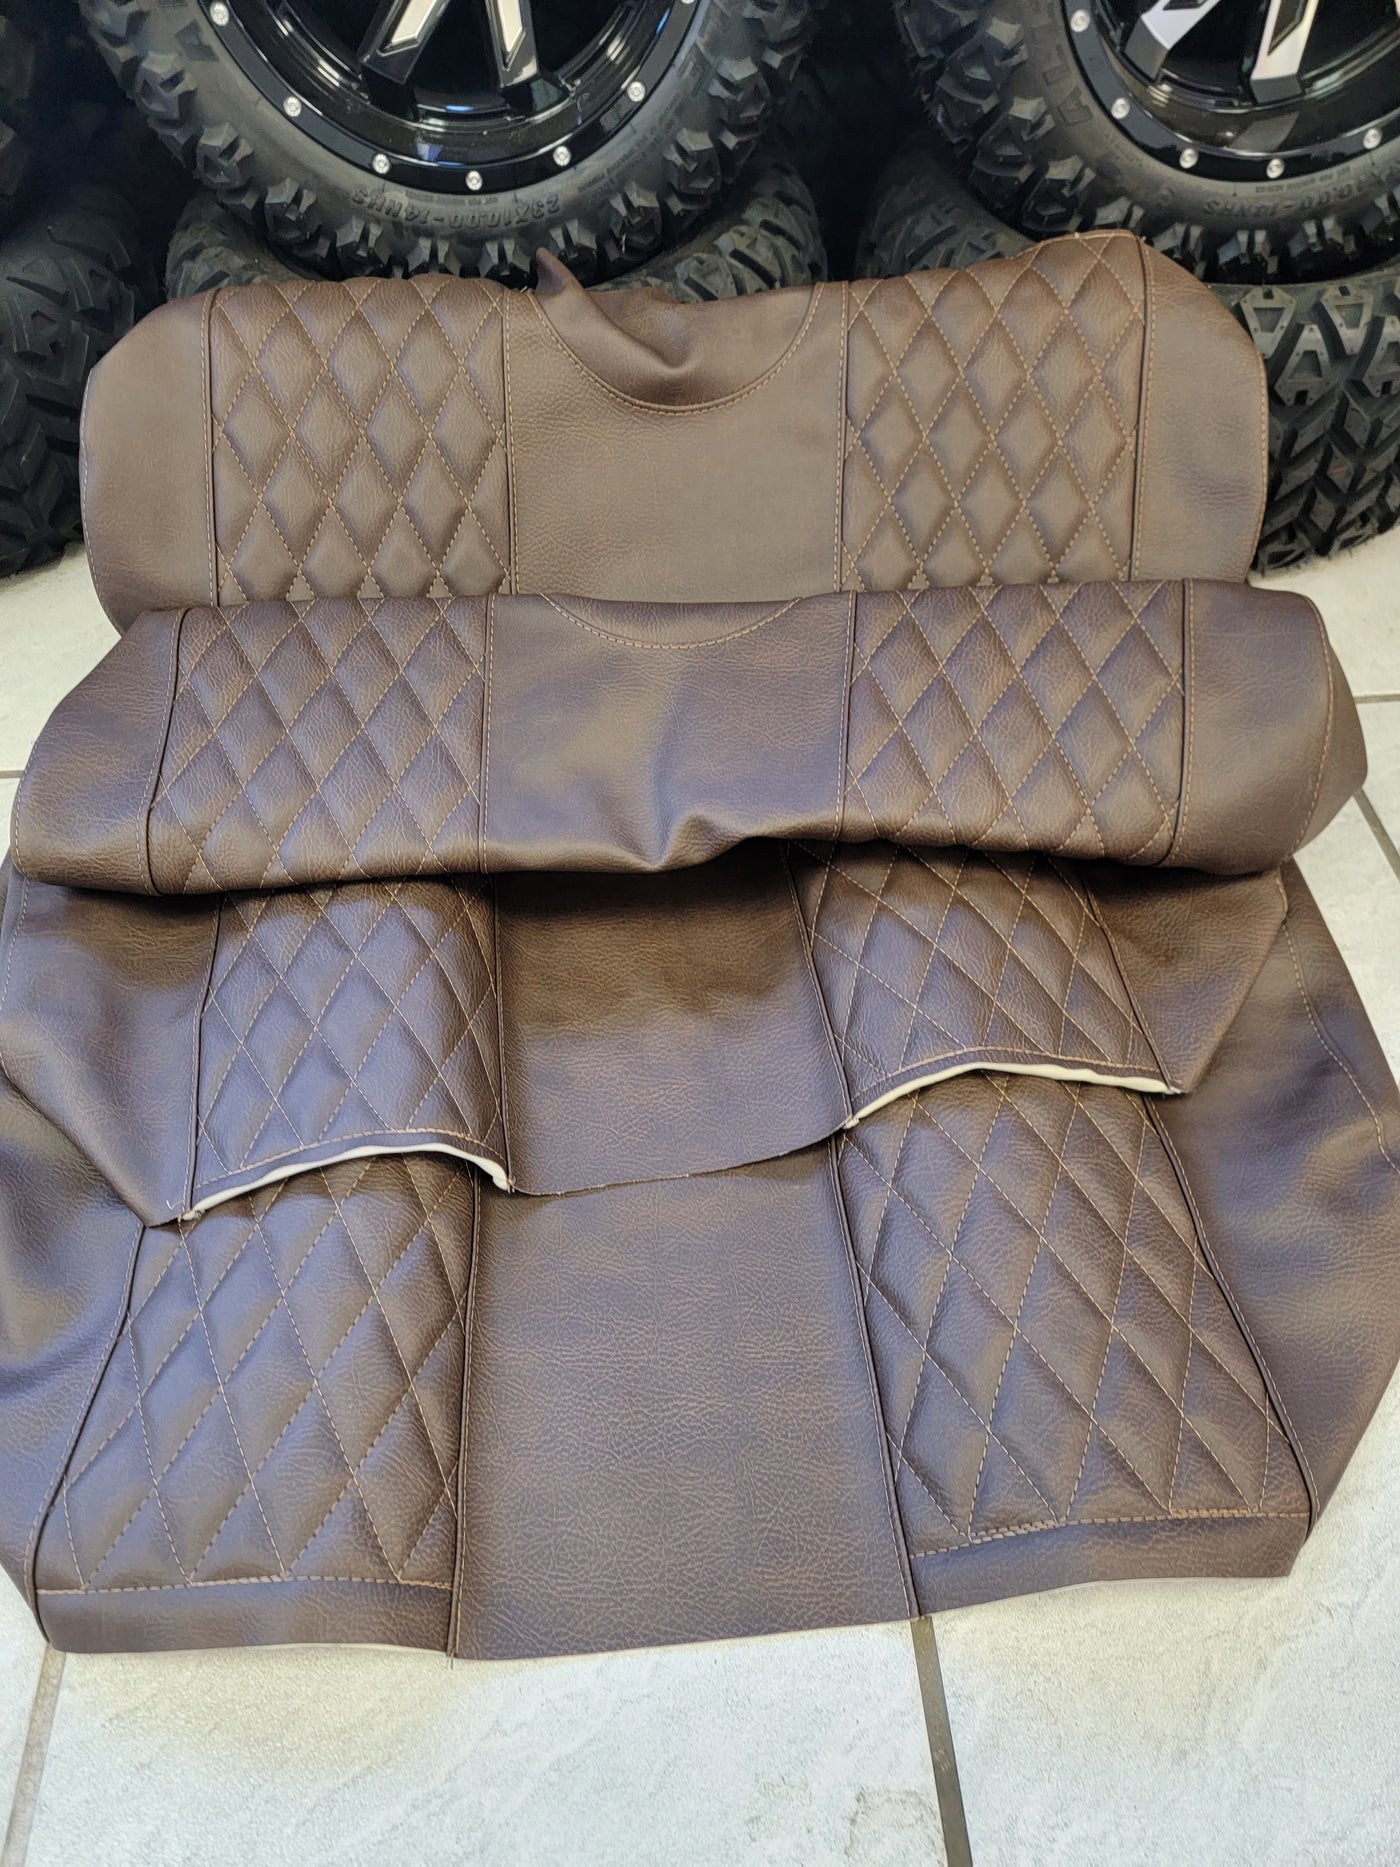 Custom Diamond Stich Brown Seat Covers Ez-Go (Ezgo) Txt/Rxv 1996-Current) or Club Car DS (2000-2013) Includes Both Front Rear Seat Covers